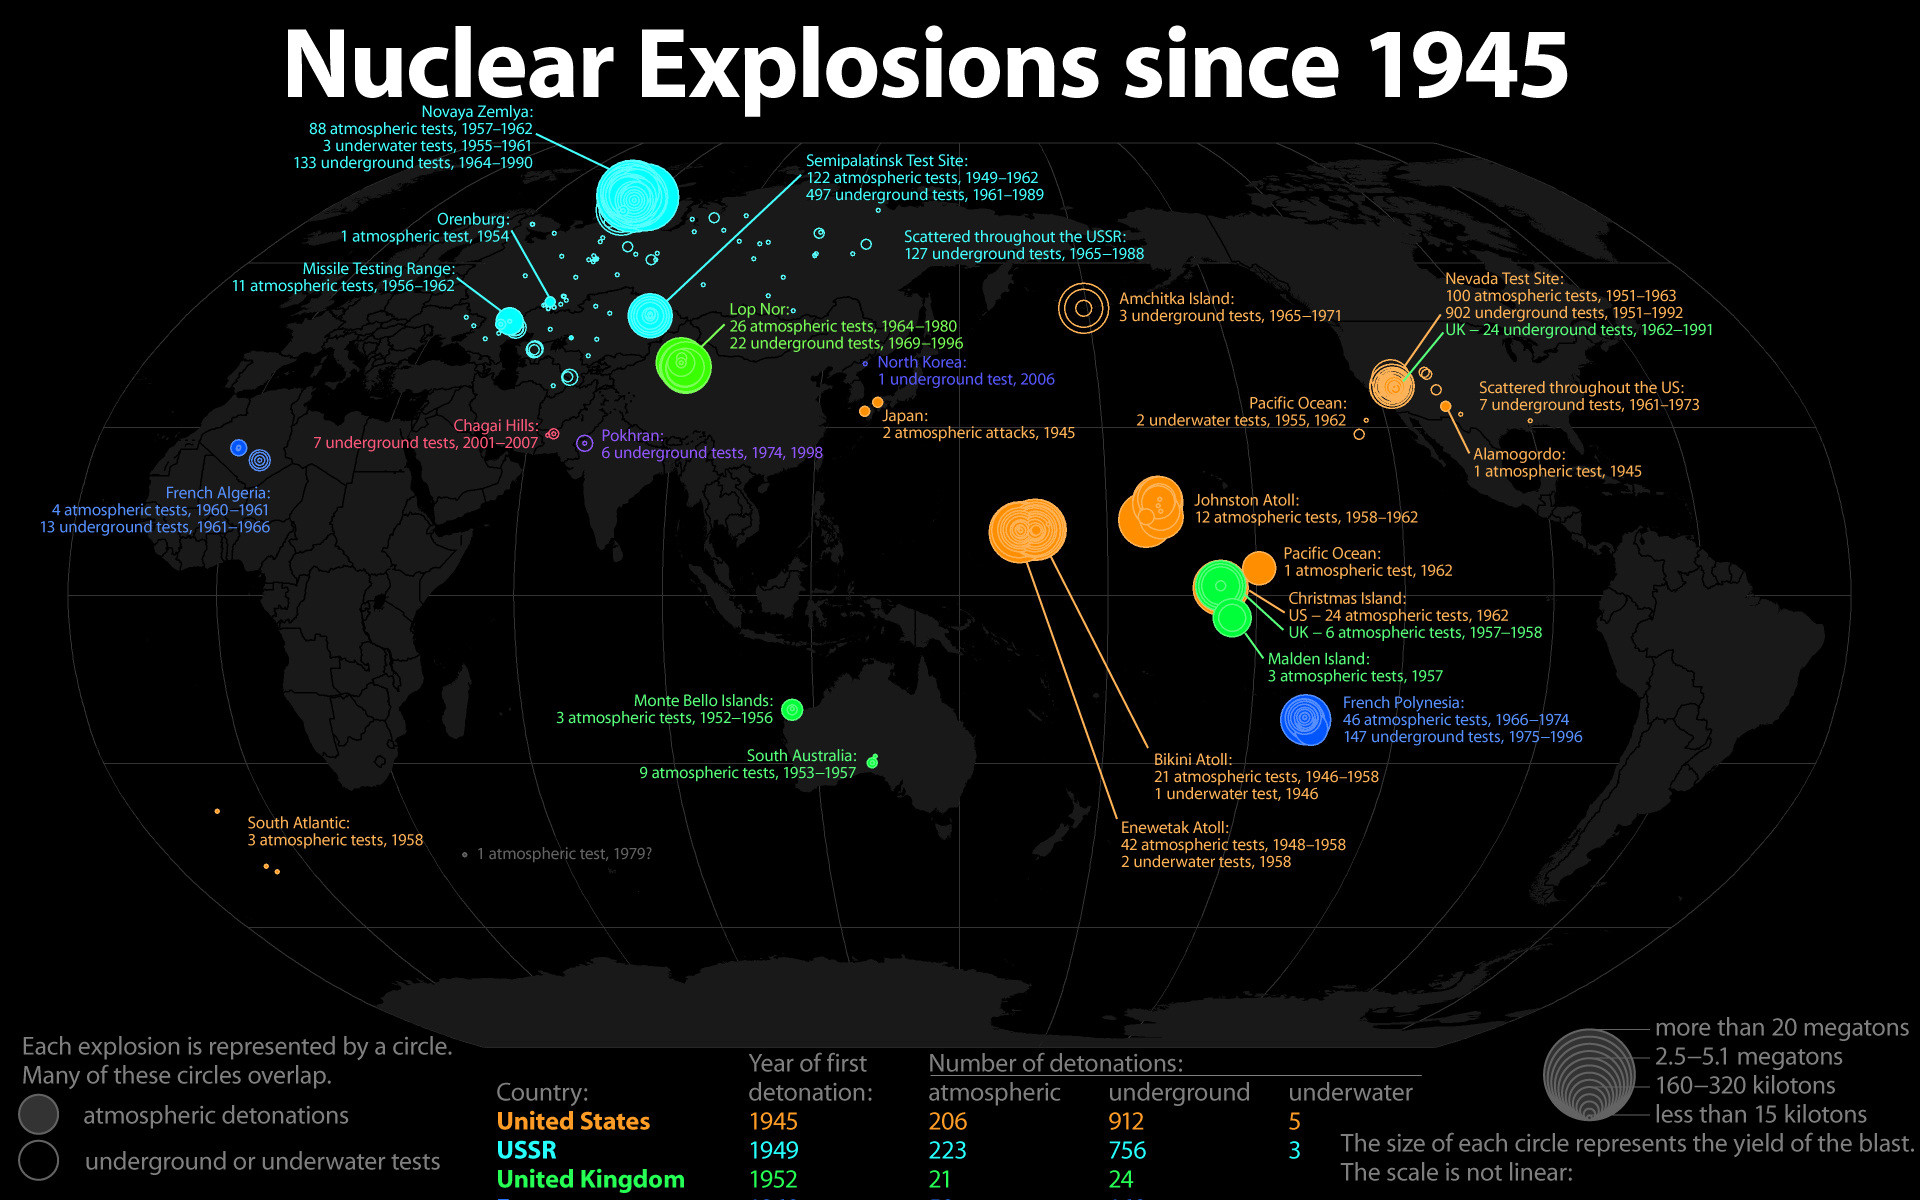 1920x1200 Nuclear Explosion since 1945 [Infographic]